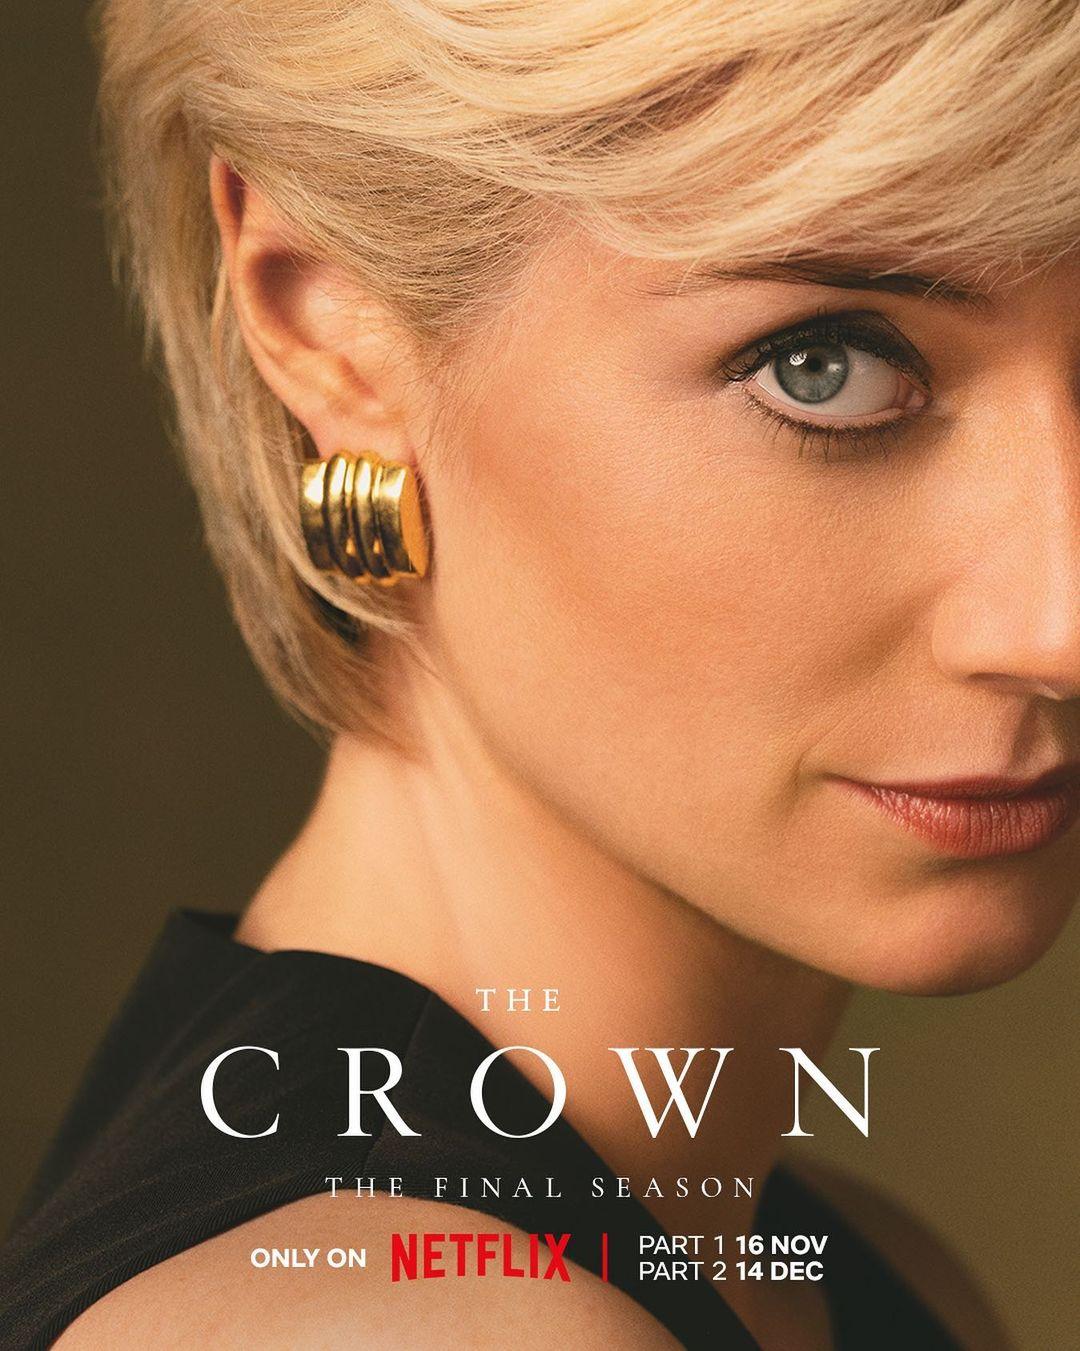 The Crown Season 6 - November 16Netflix's highly acclaimed series, 